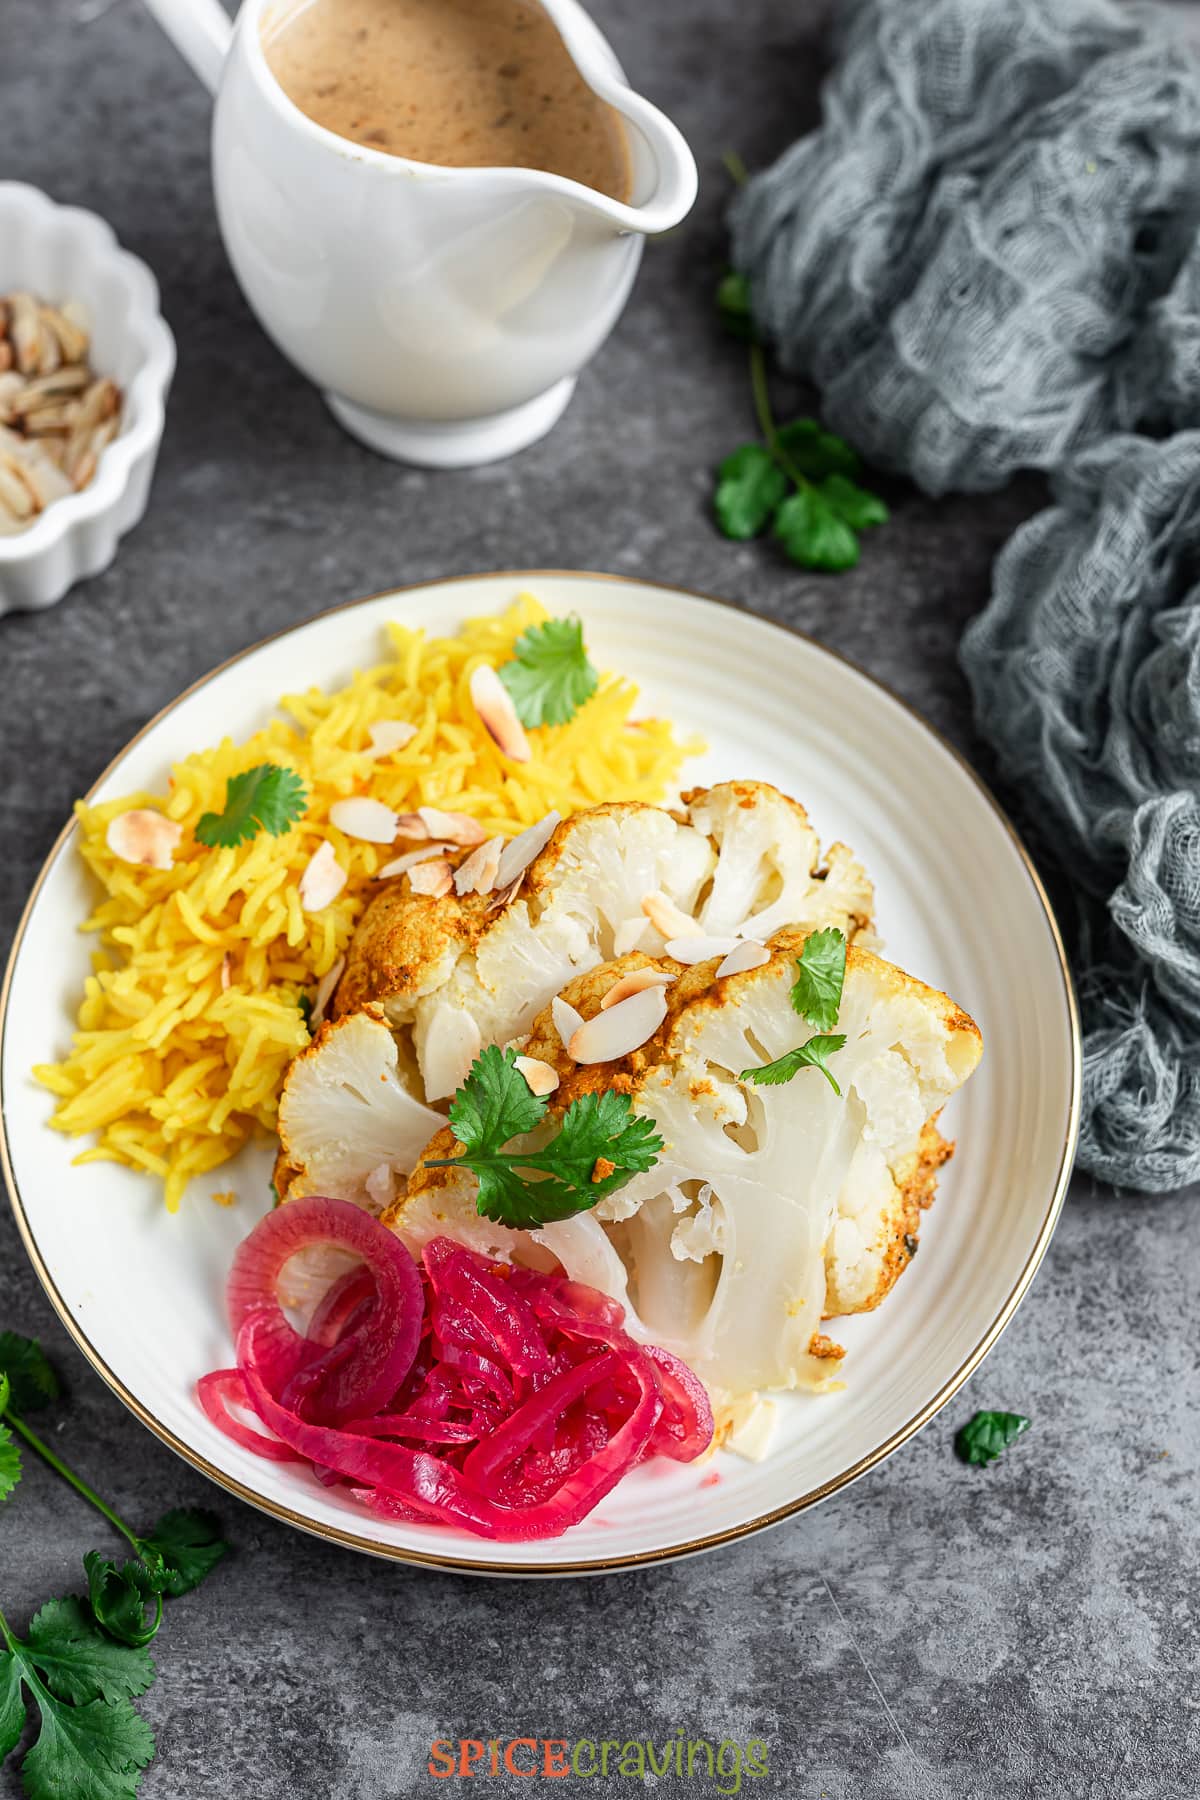 Plate with cauliflower steaks, pickled onion and saffron rice